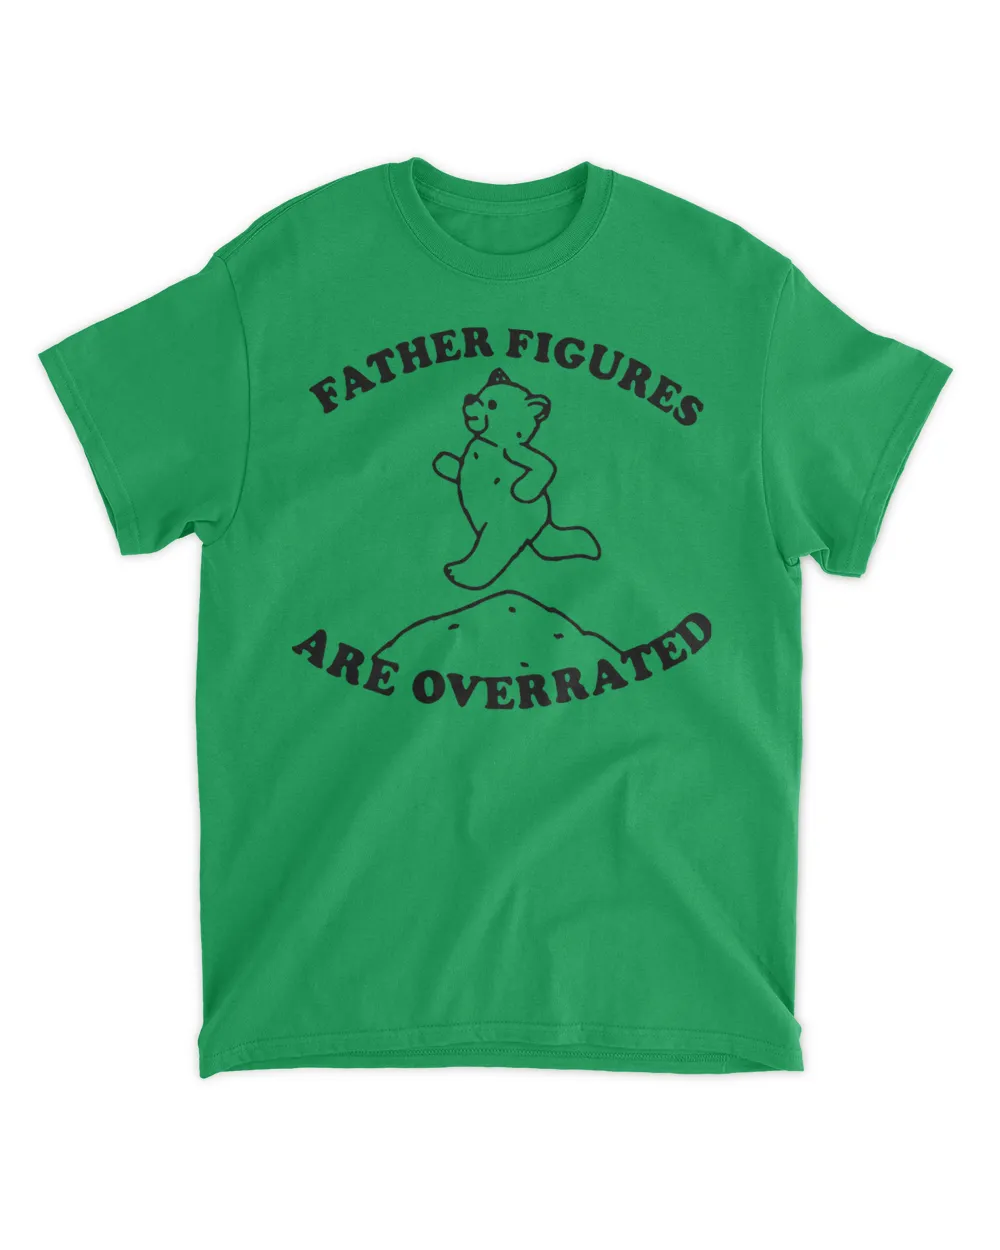 Father Figures Are Overrated Shirt Unisex Standard T-Shirt irish-green 